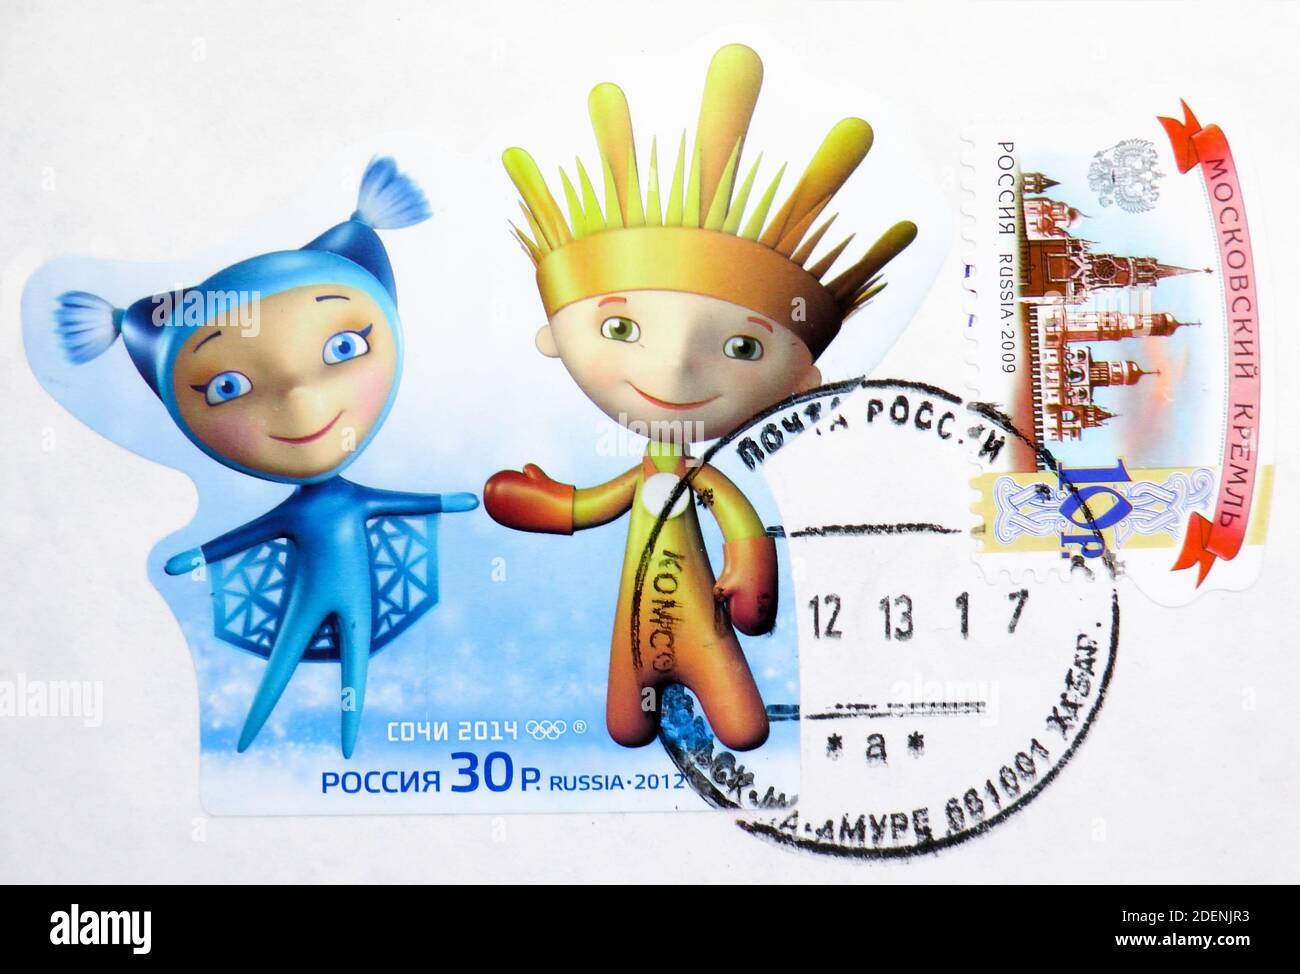 MOSCOW, RUSSIA - MAY 5, 2020: Postage stamp printed in Russia with stamp of Komsomolsk-on-Amur shows Ray of Light, Snowflake - Mascots of 2014 Winter Stock Photo